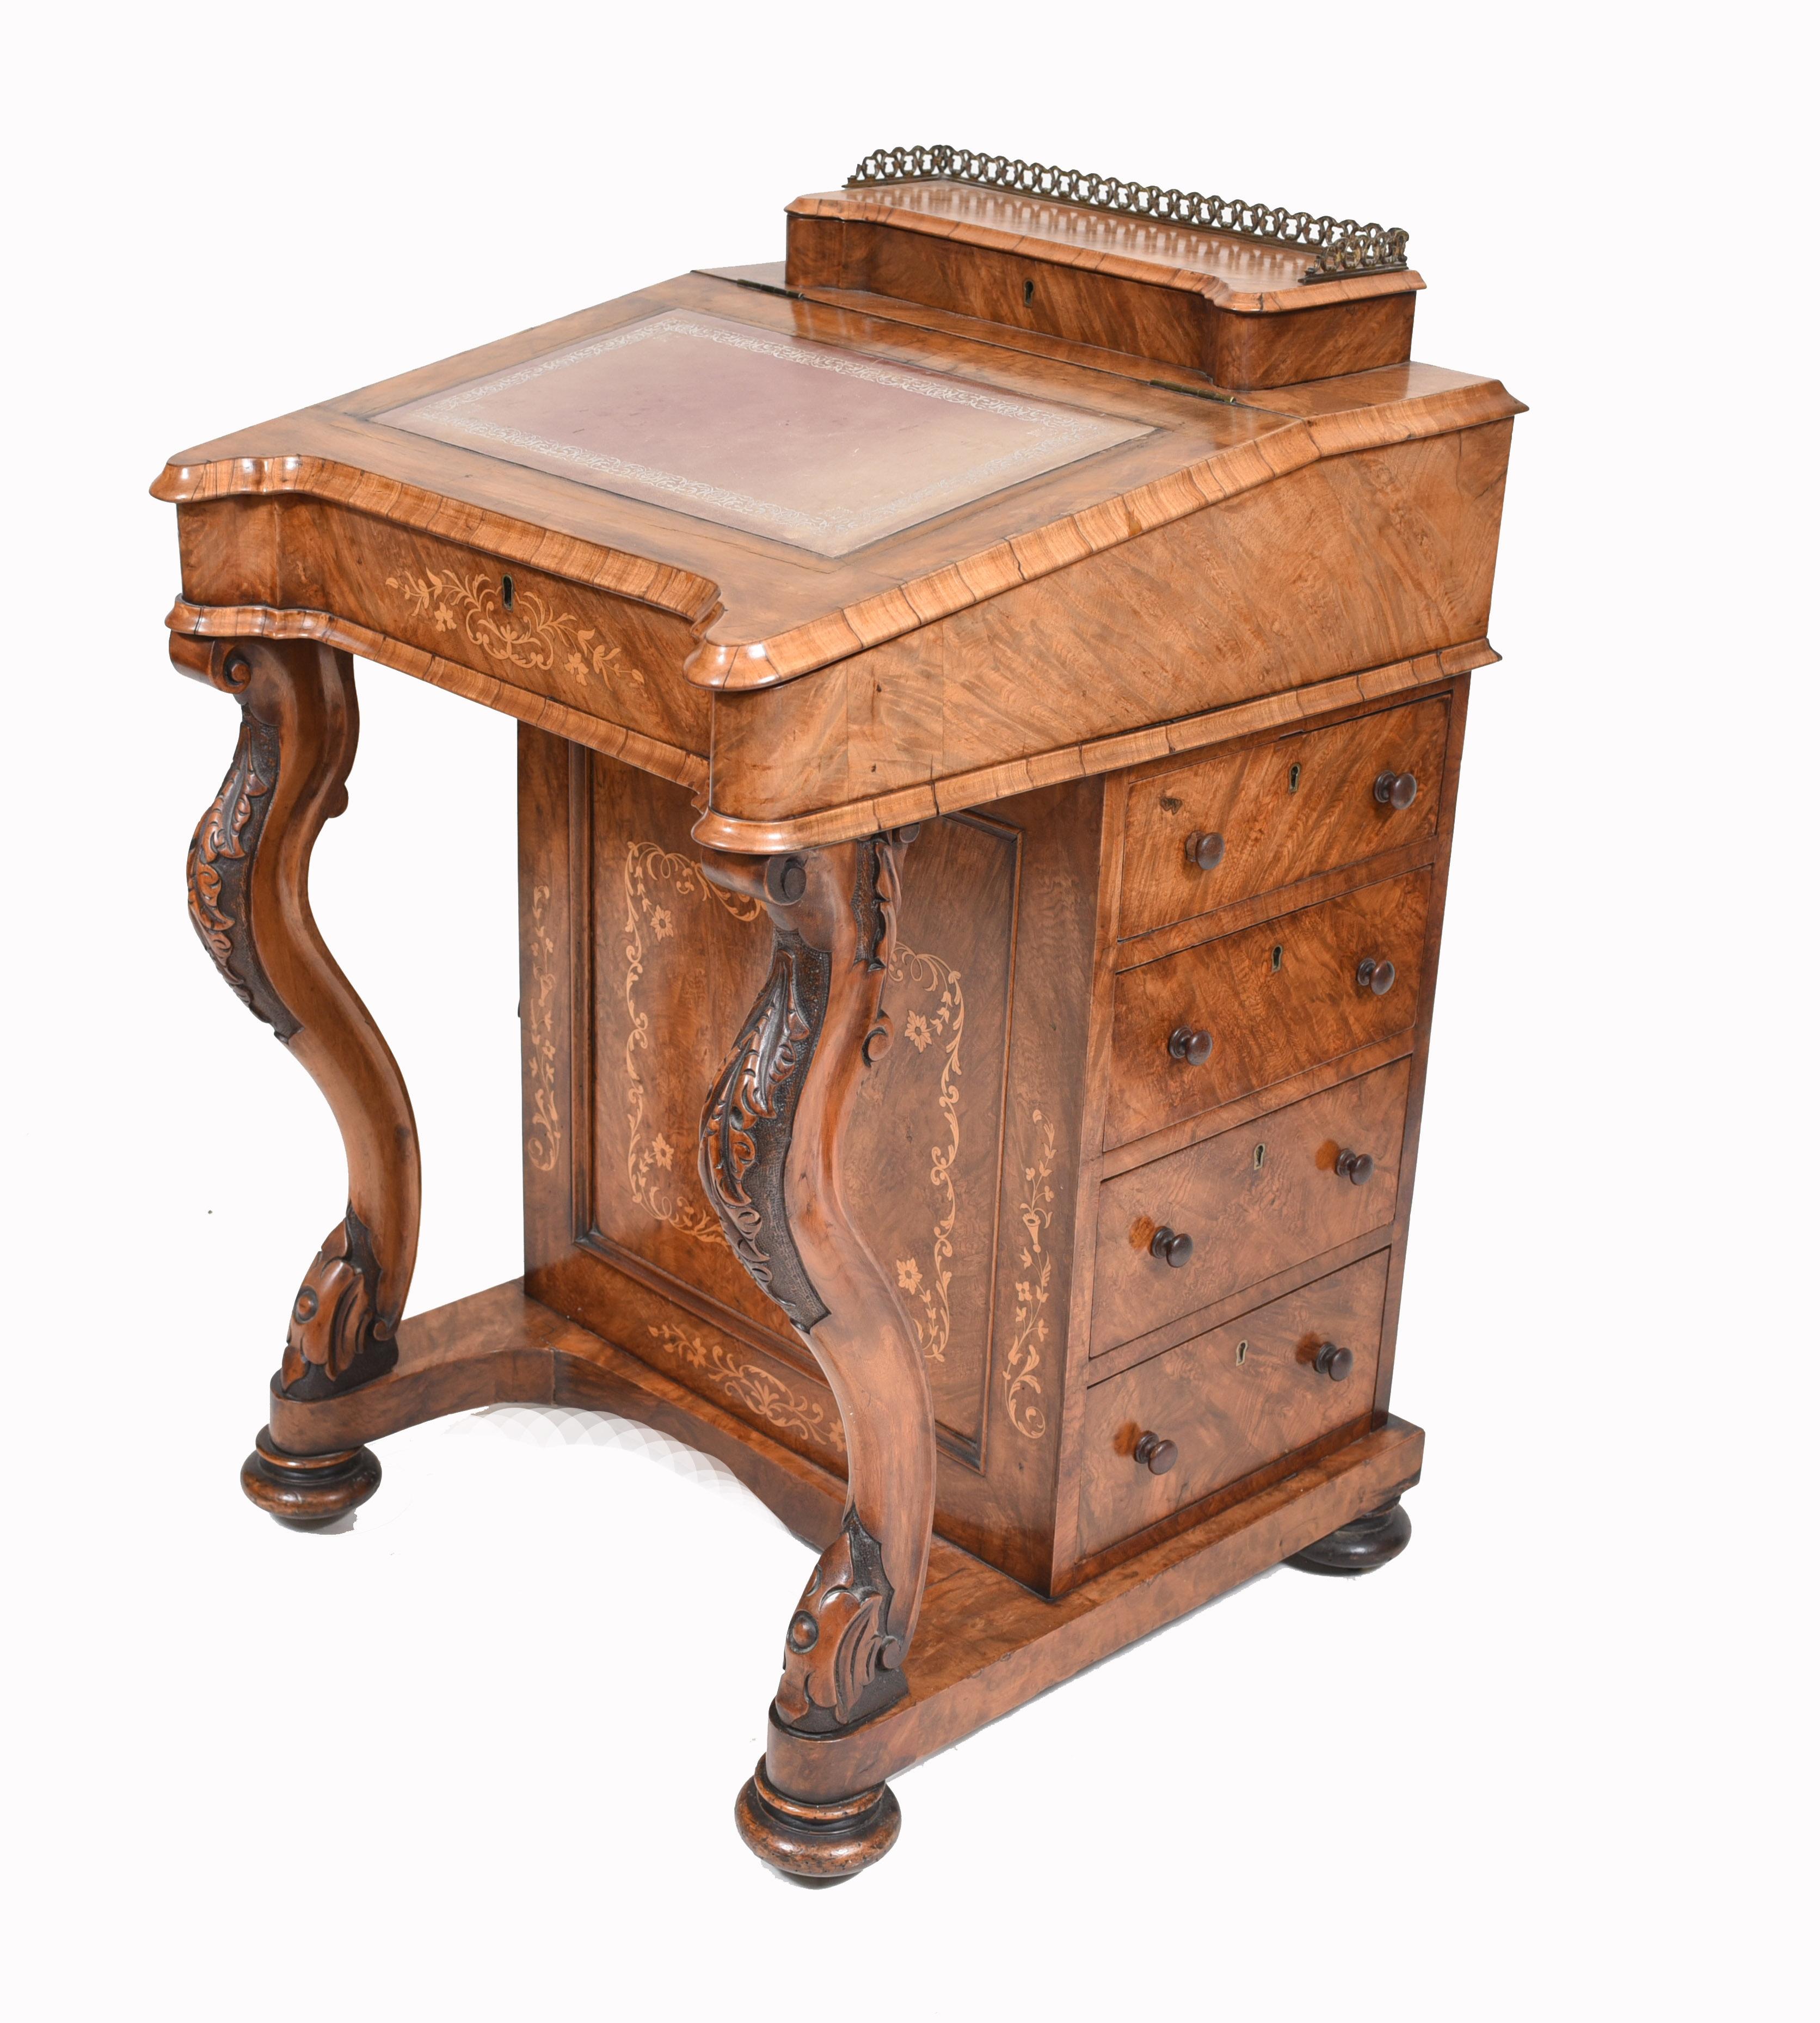 High quality Victorian Davenport desk
Such a good look to this piece, exceptional crafting and quality
Burr walnut has a lovely patina
Intricate marquetry inlay work on all surfaces
Offered in great shape ready for home use right away.
 